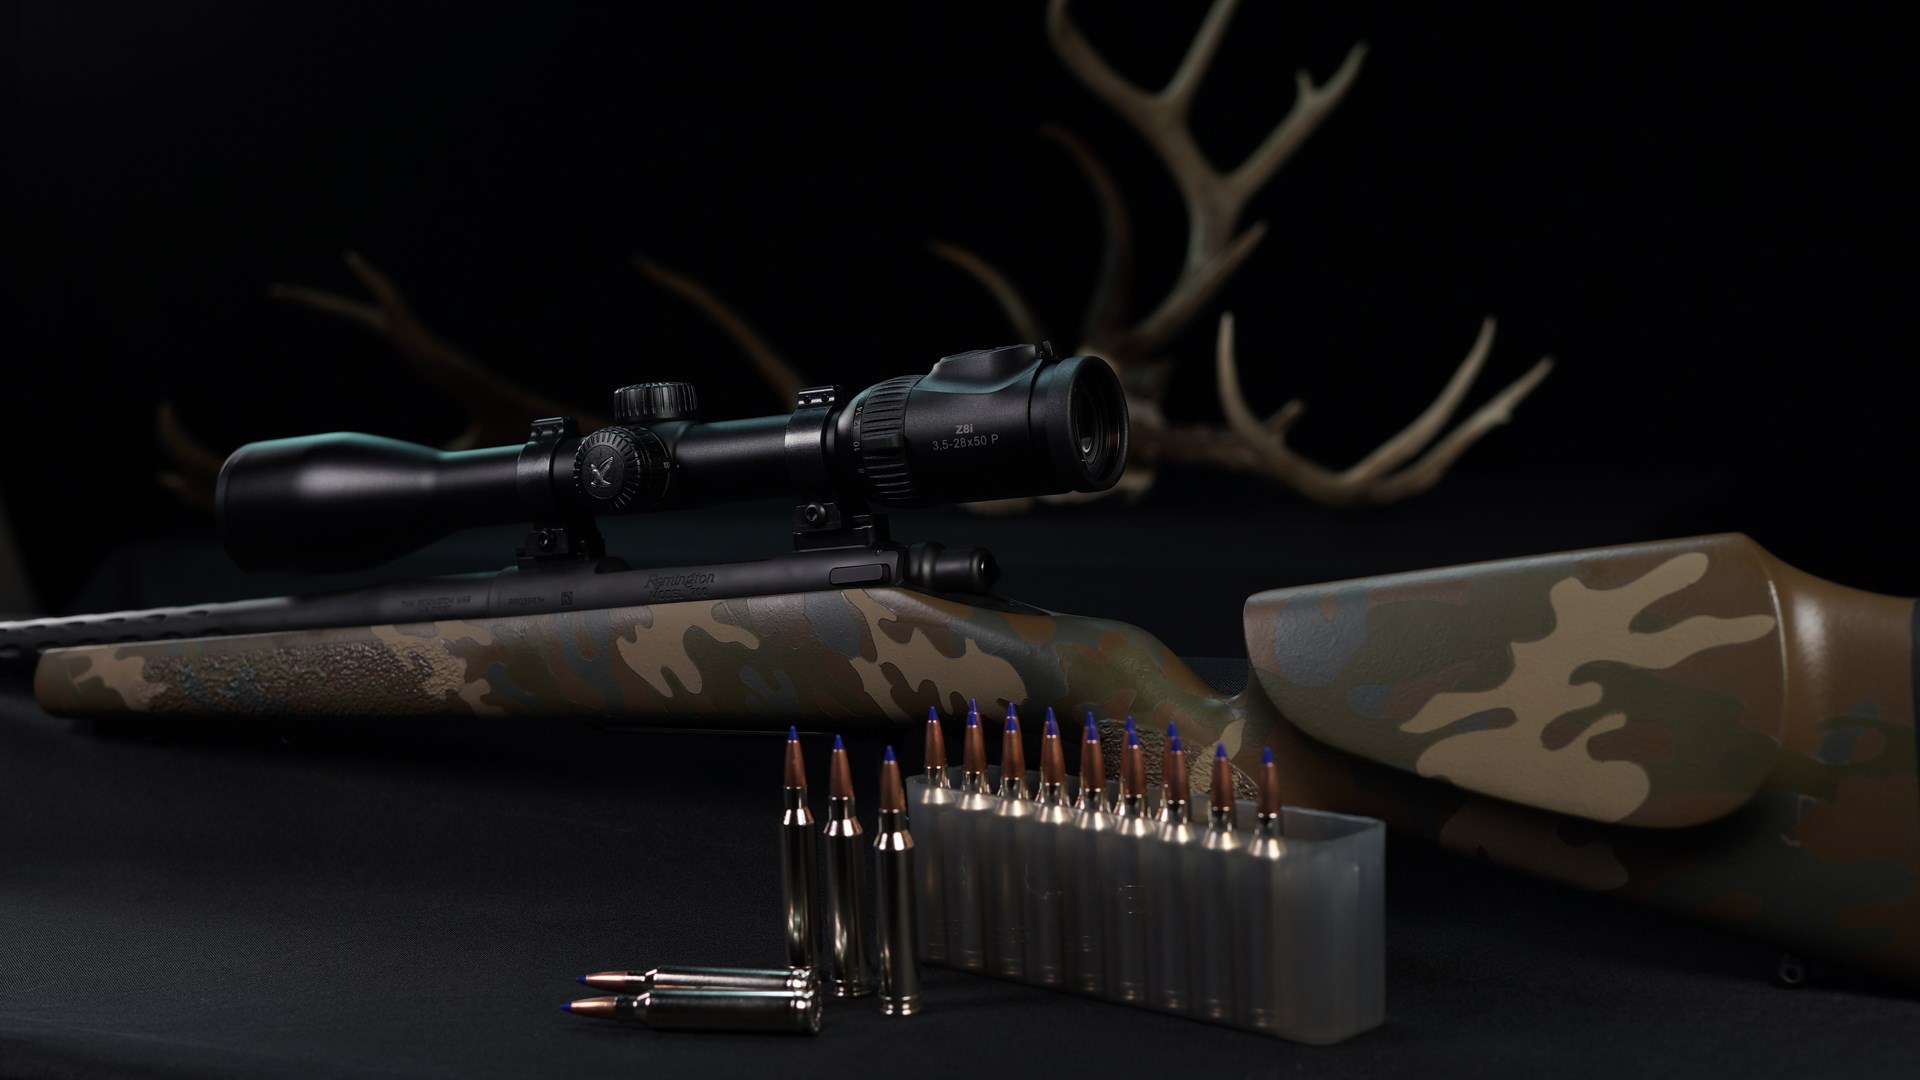 The new M700 X Custom from the Custom Shop is intended to be a complete, ready-to-go long-range target or hunting rifle, with Shilen barrel, Timney trigger, and McMillan stock. Test rifles were topped with Swarovski X8i scopes.